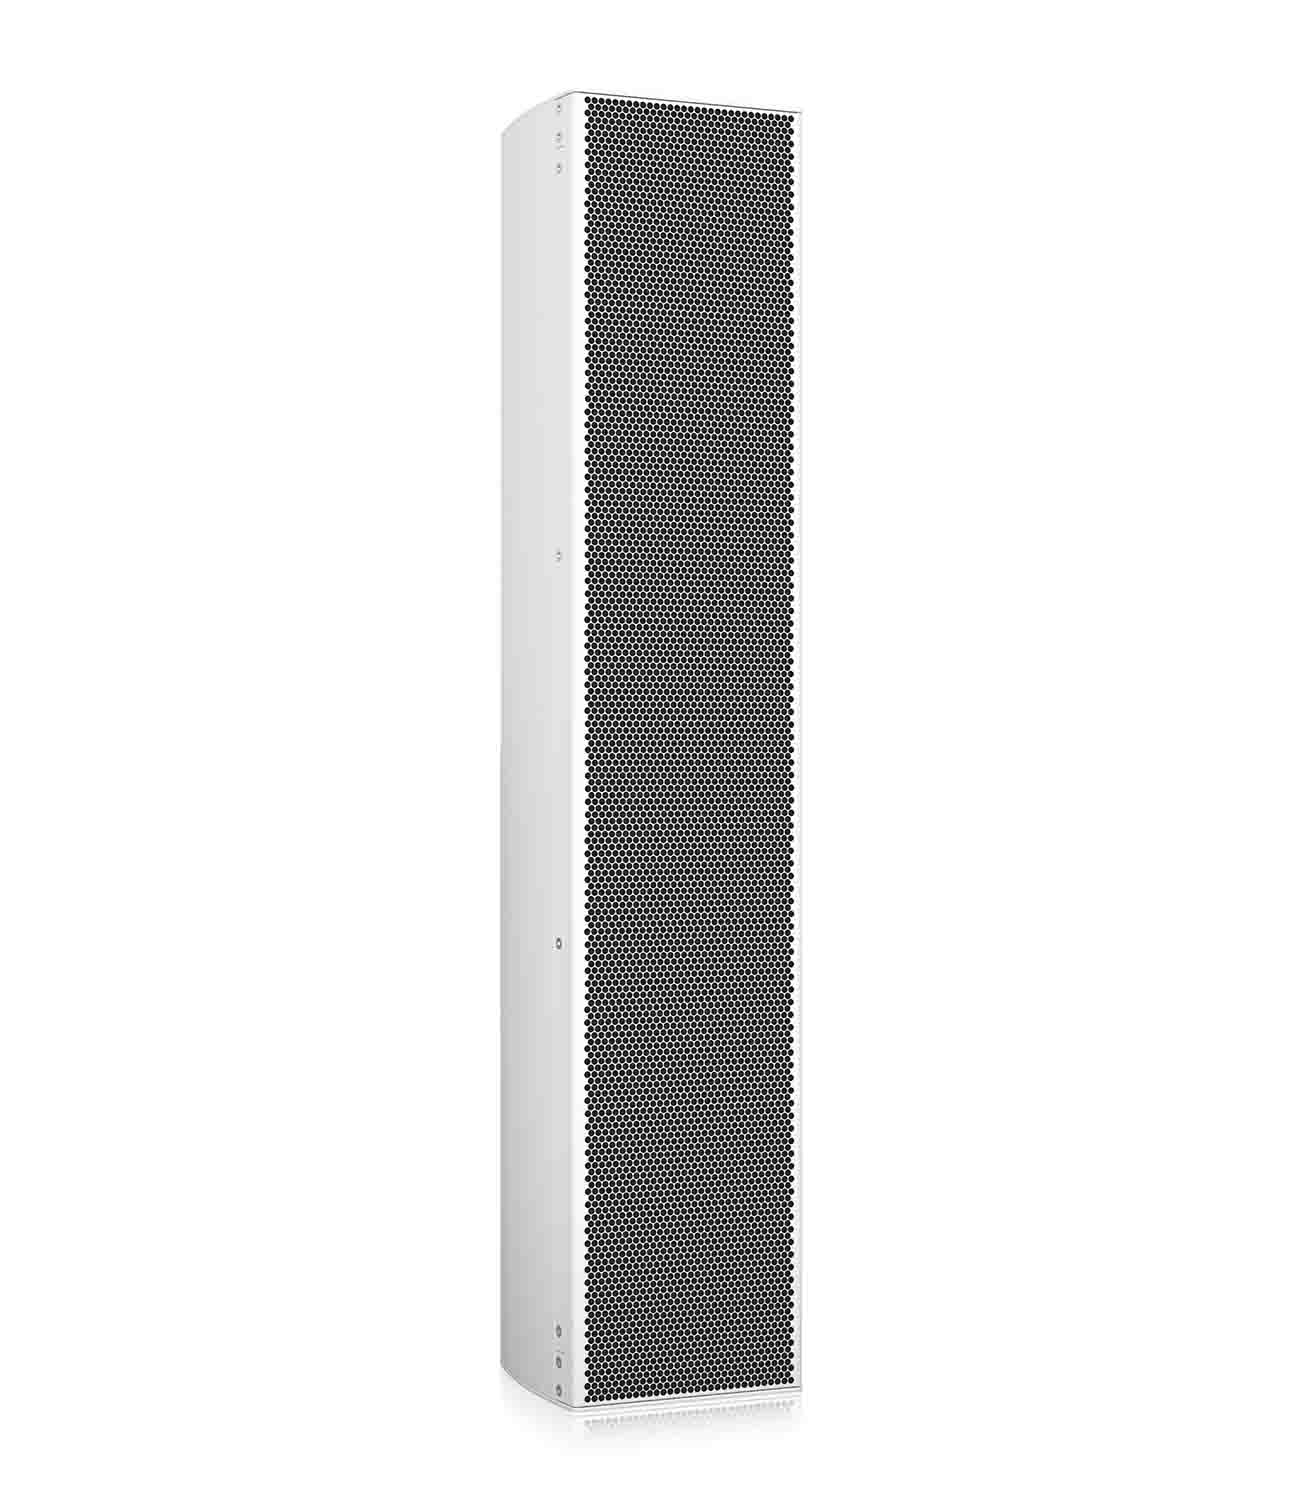 Tannoy QFLEX 8 Digitally Steerable Powered Column Array Loudspeaker with 8 Independently Controlled Drivers - Hollywood DJ